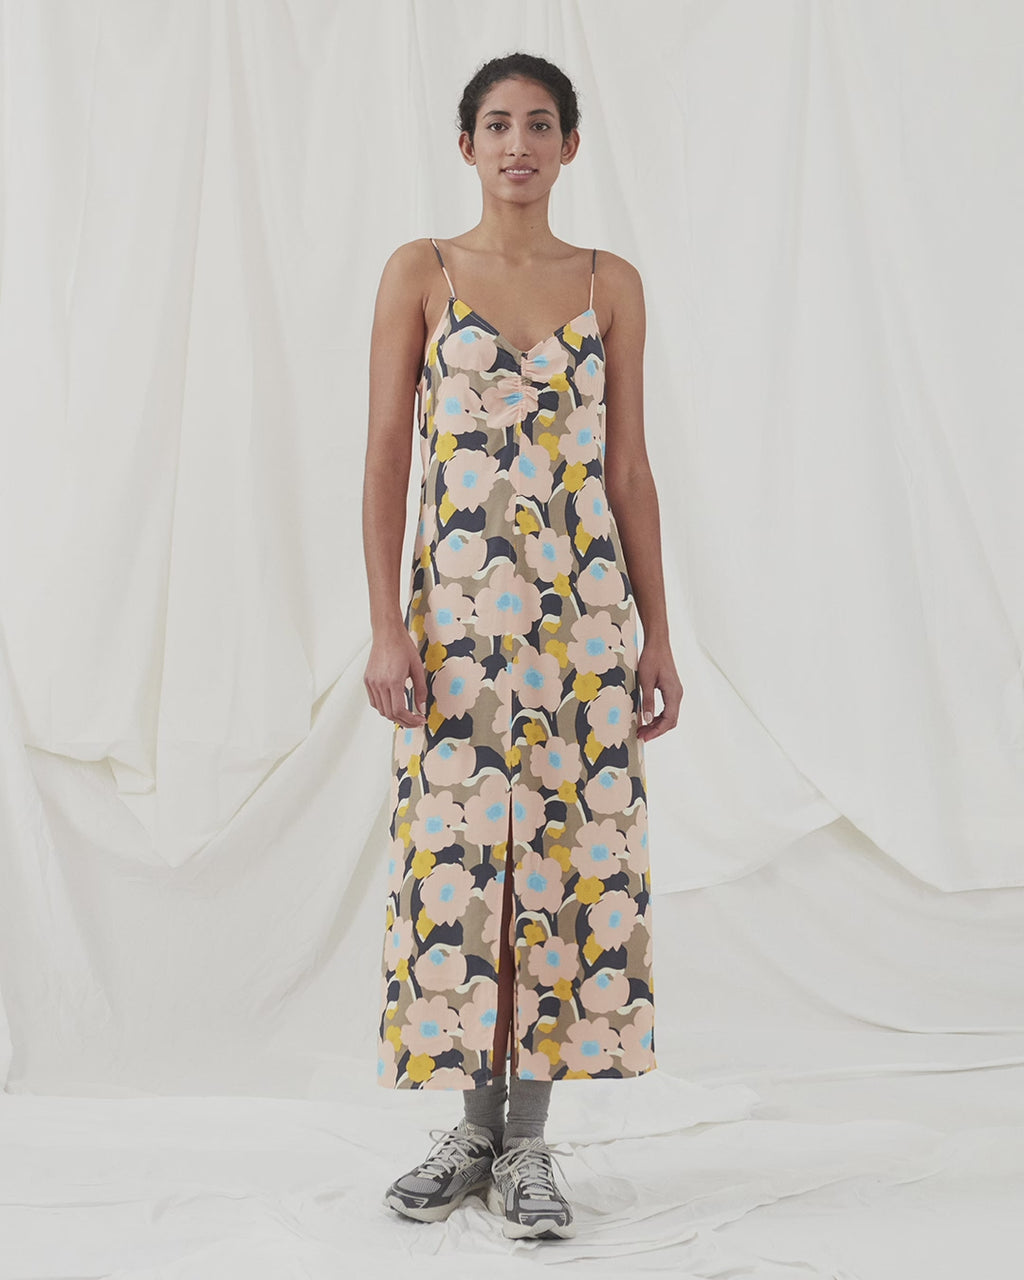 Midi dress in a relaxed fit and floral print. DustinMD print strap dress has a v-neck with ruched details in the center, narrow straps, and zipper in the back. Slit in front. The model is 177 cm and wears a size S/36.  Material: